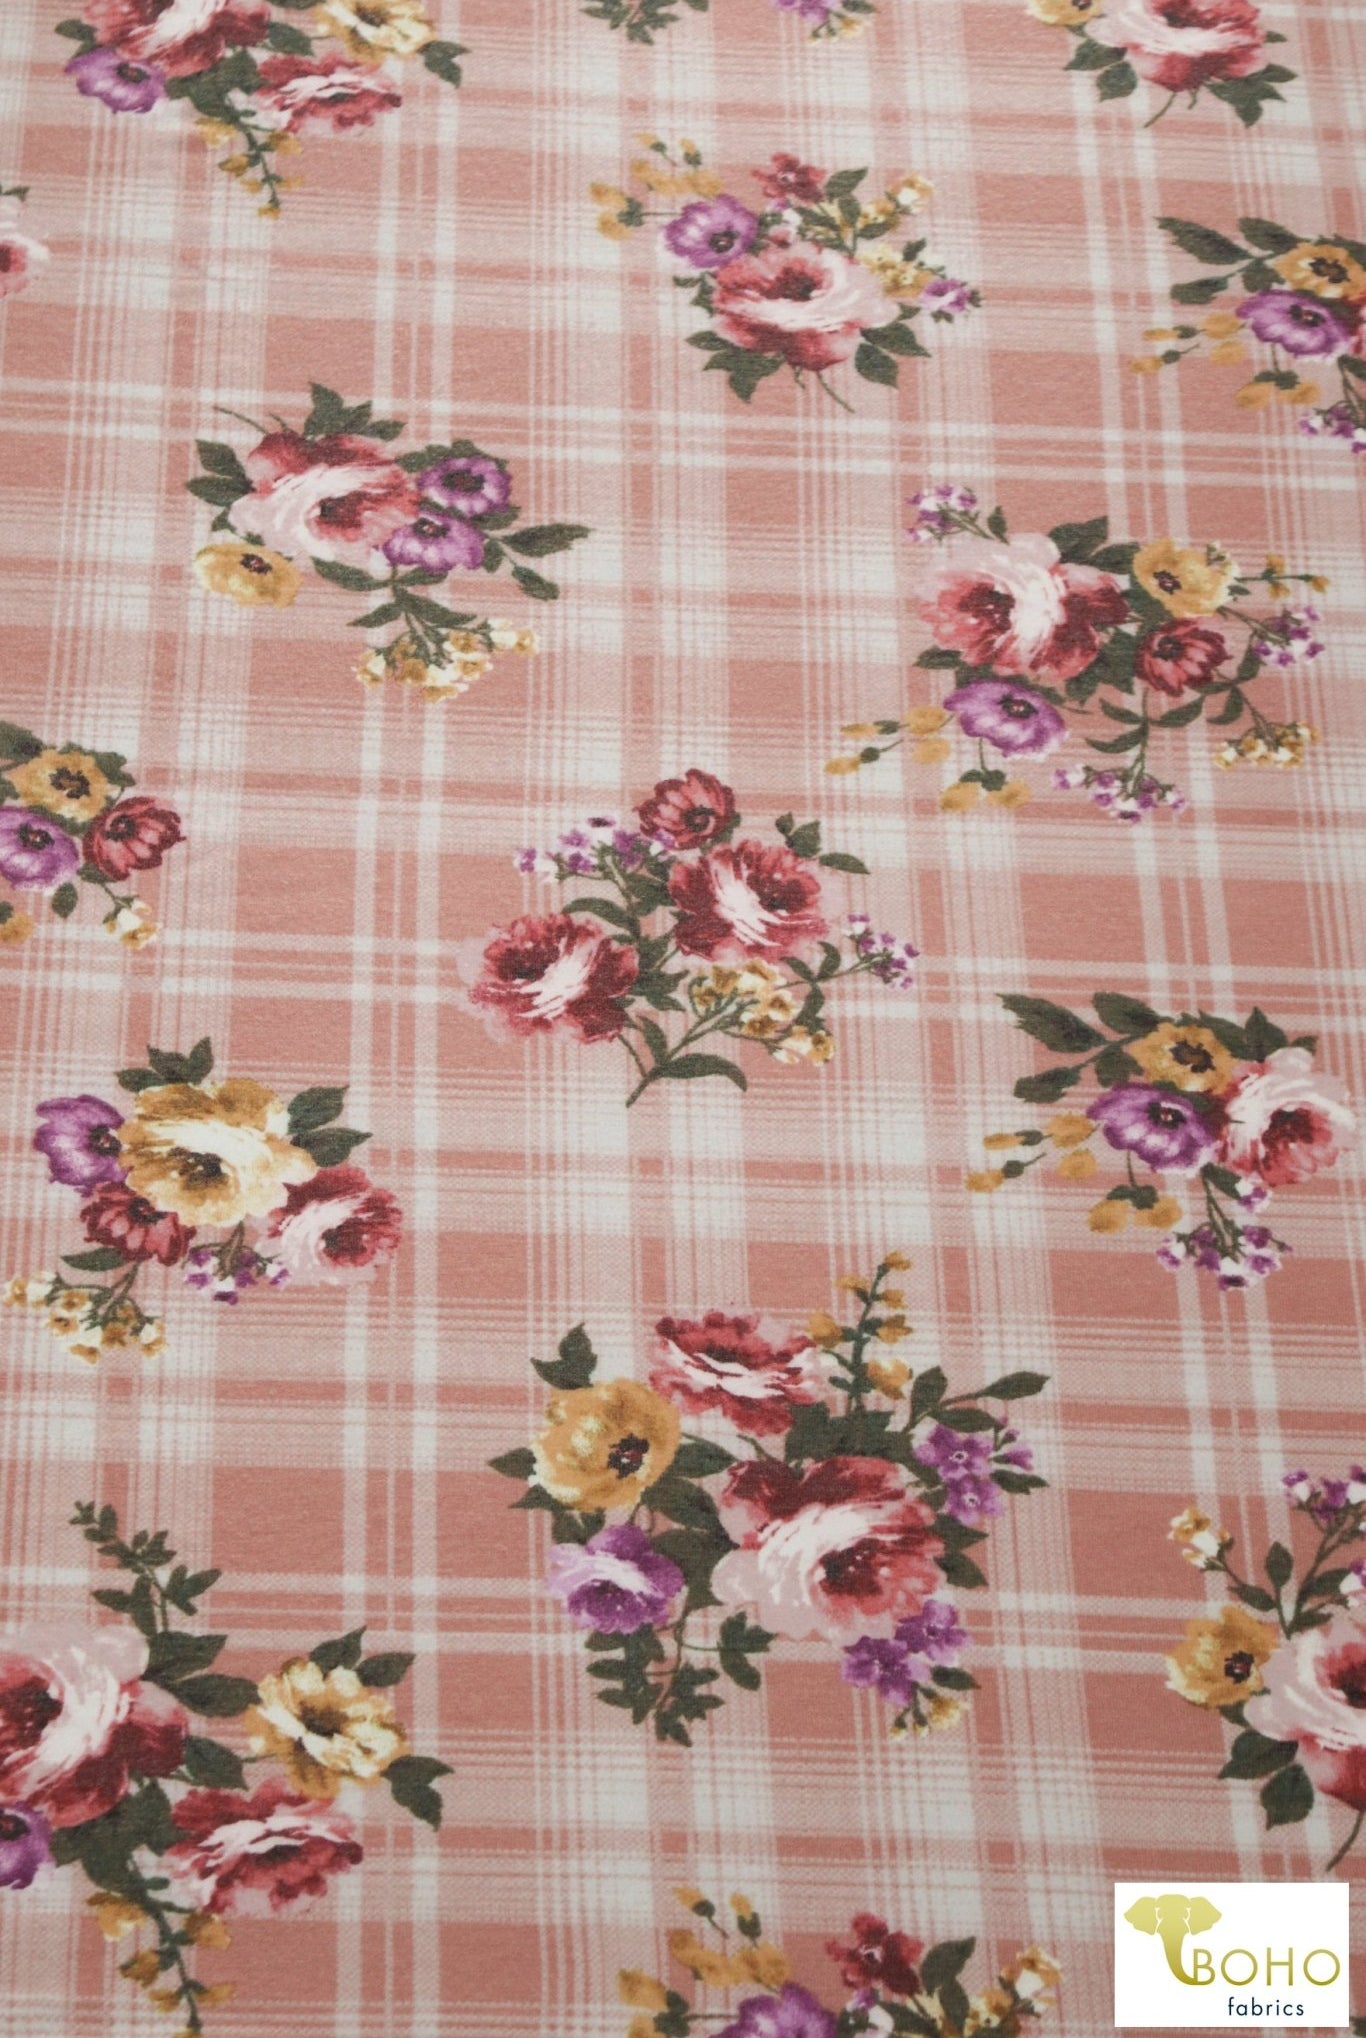 Last Cuts! Summer Plaid Florals on Pink, French Terry Print. FTP-317 - Boho Fabrics